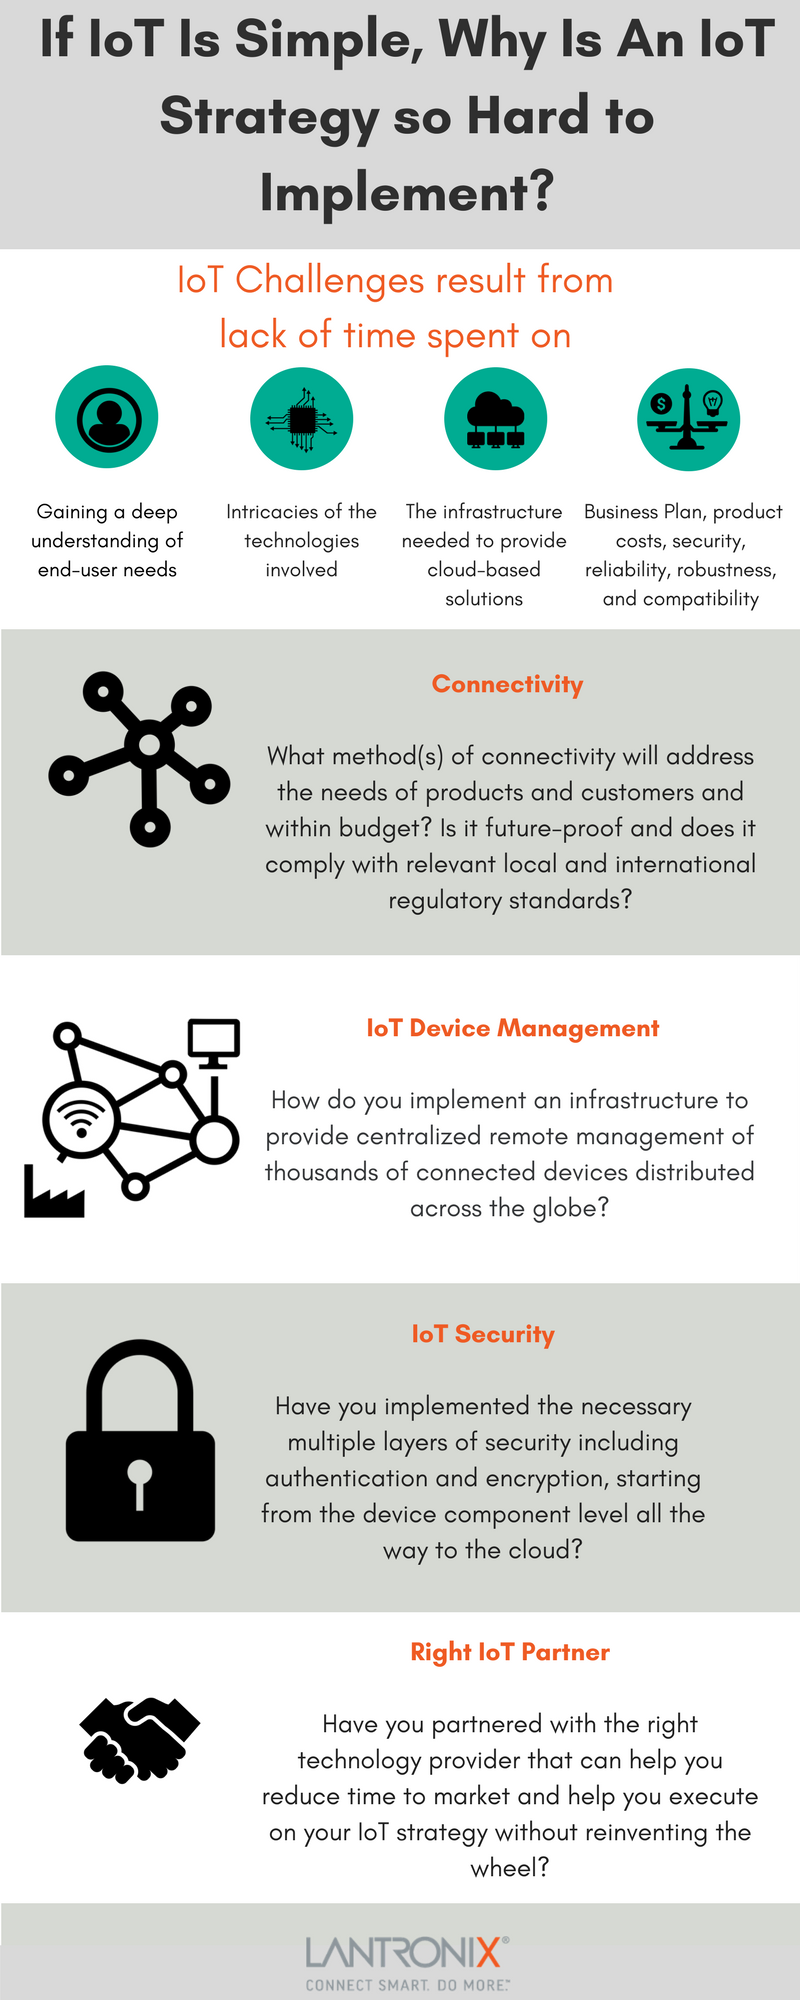 IoT Strategy Infographic by Lantronix